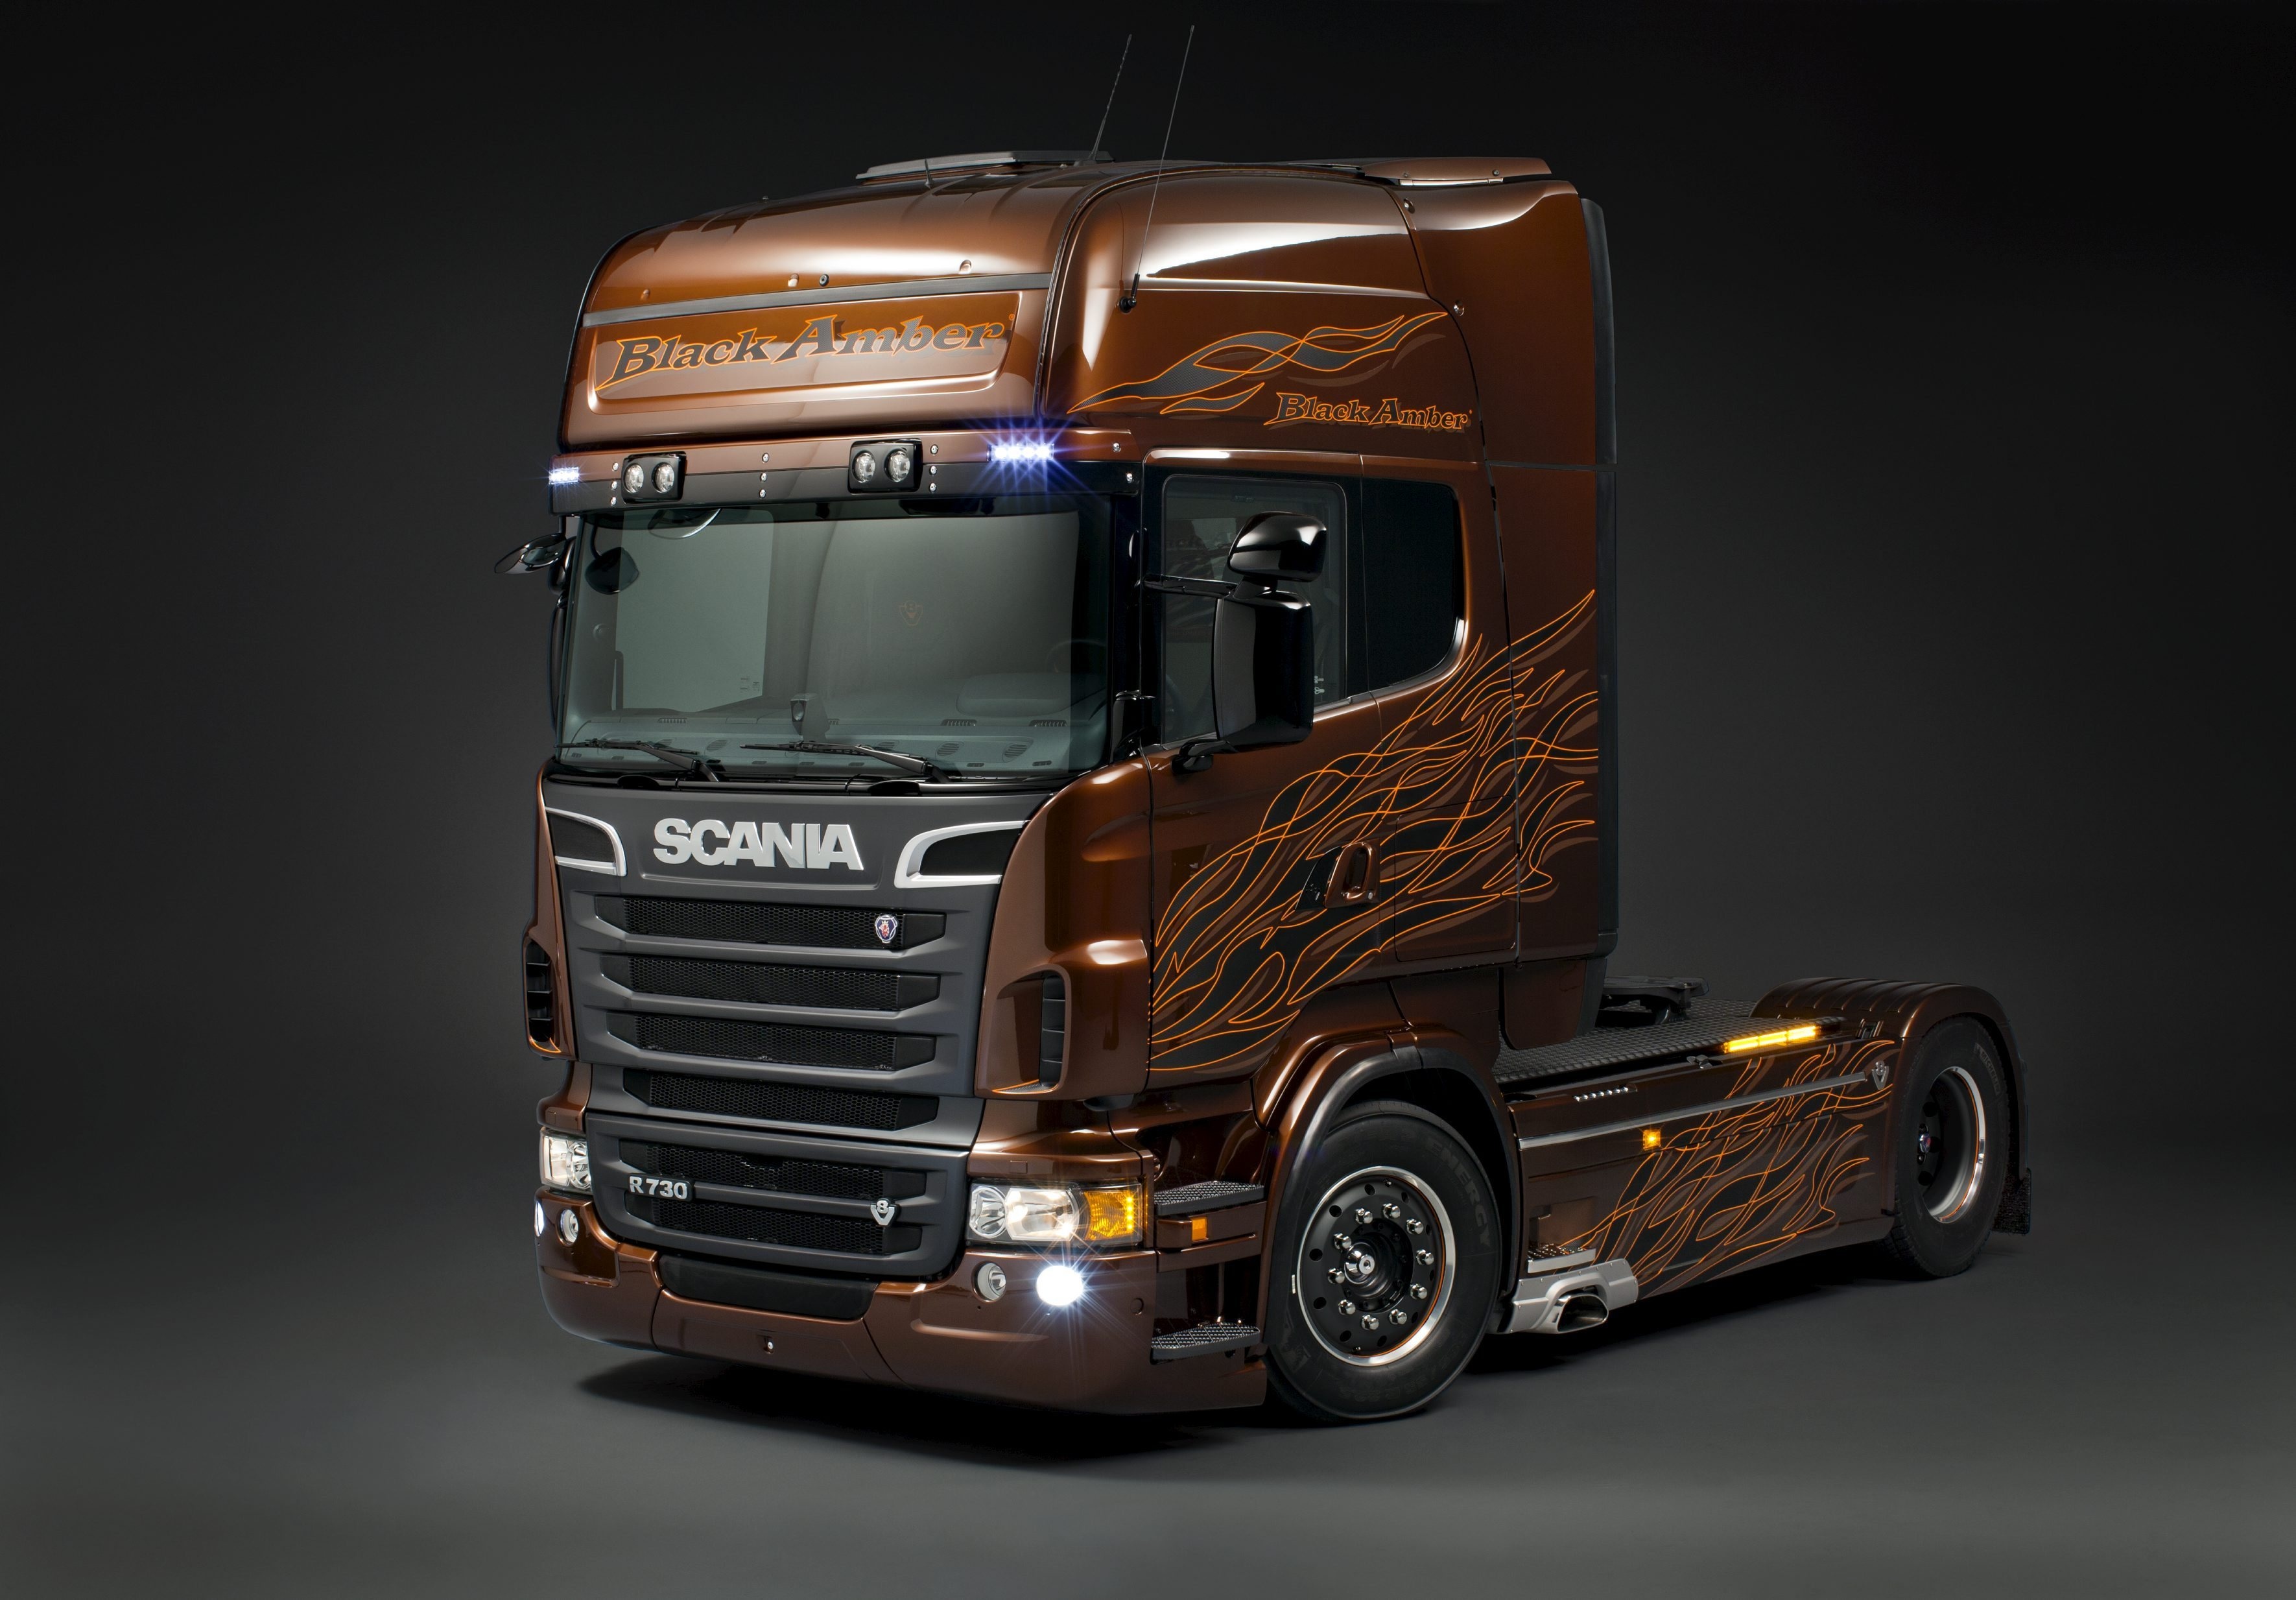 Vehicles Scania R730 HD Wallpaper | Background Image